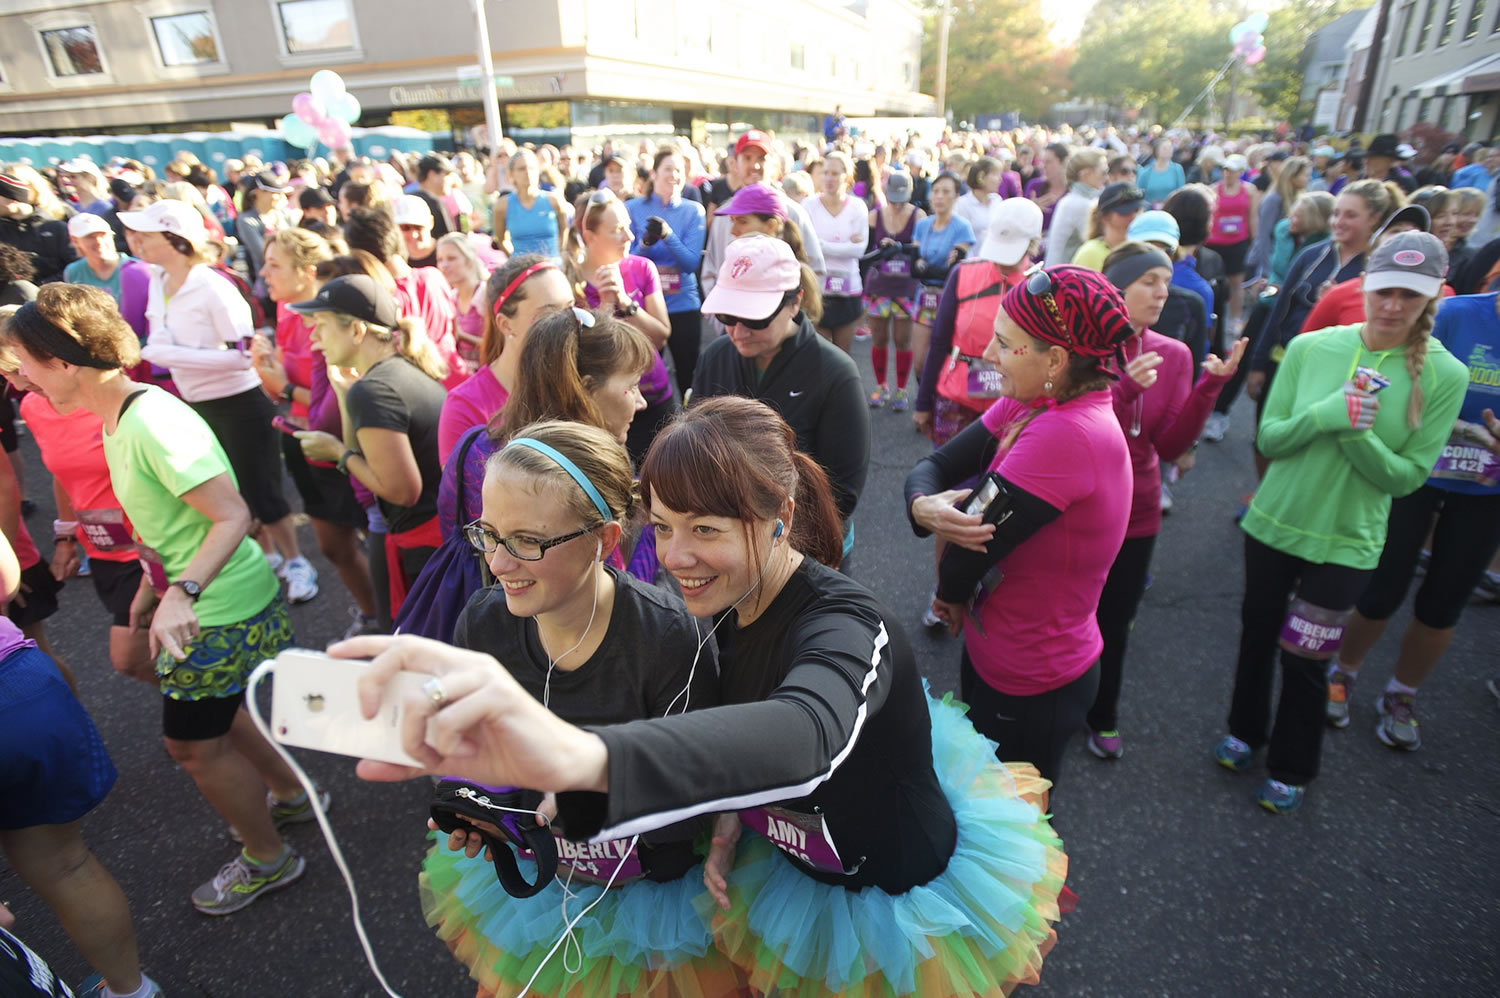 Runners prepare for the start of the seventh annual Girlfriends Half Marathon -- now named Girlfriends Run for a Cure -- on a chilly morning in October 2013.